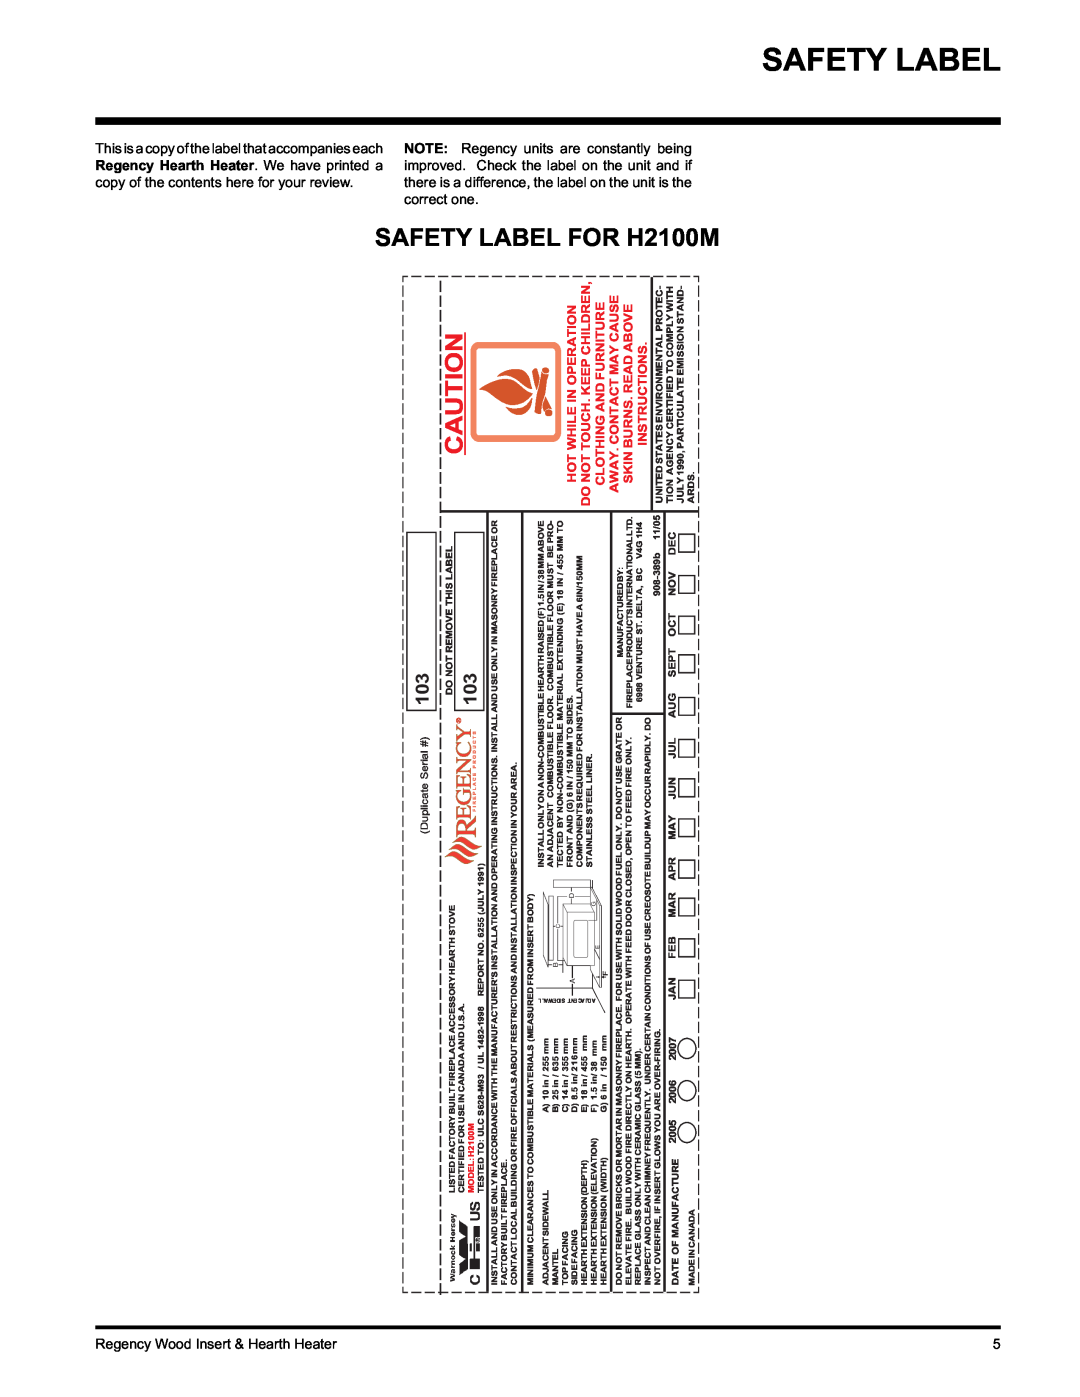 Regency I1100S Safety Label, SAFETY LABEL FOR H2100M, Hot While In Operation, Do Not Touch. Keep Children, 2006, 2007 